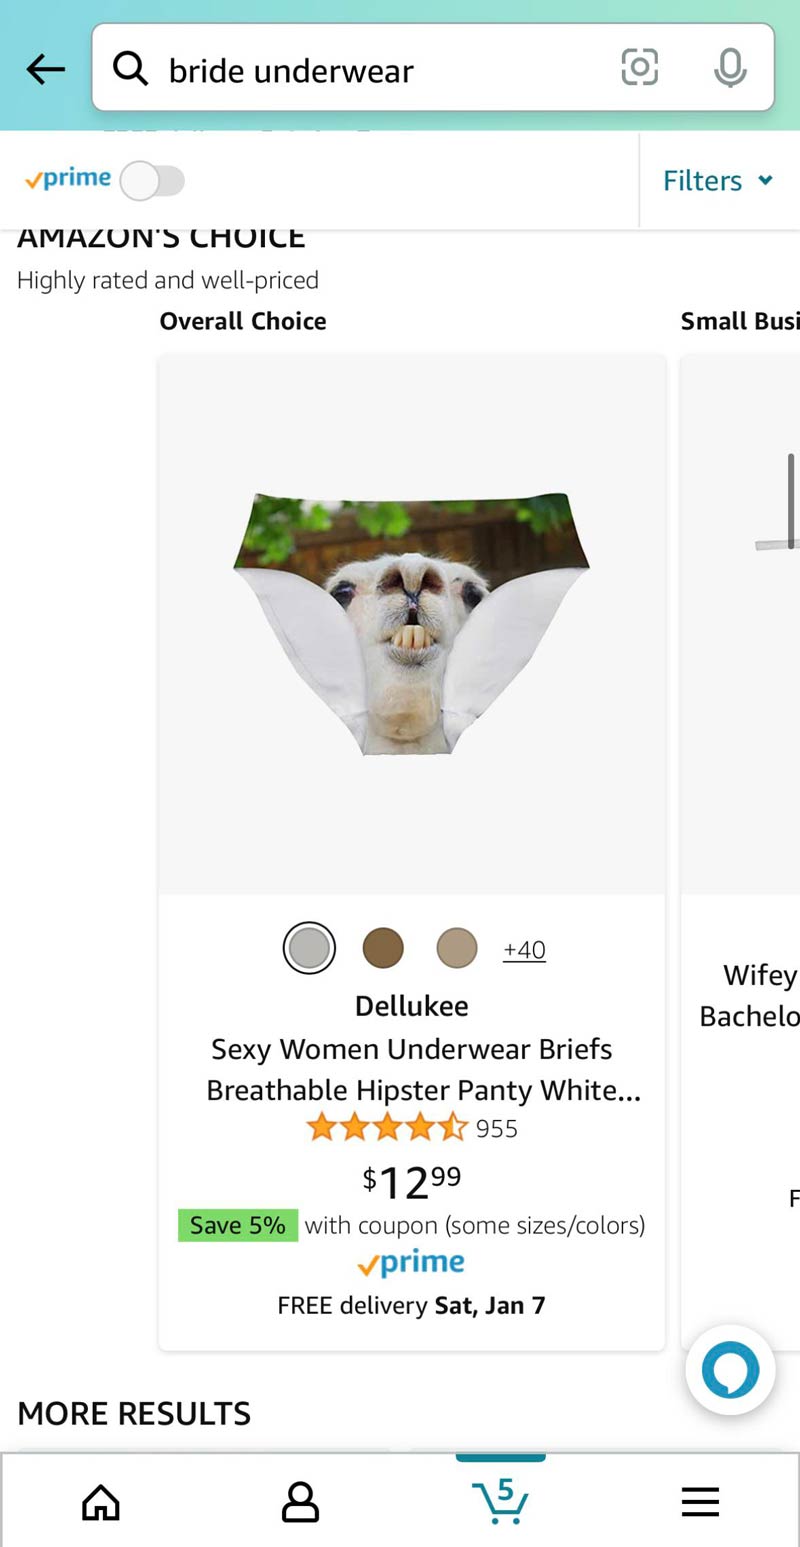 funny and random pics - Amazon.com - Qbride underwear prime Amazon'S Choice Highly rated and wellpriced Overall Choice A More Results 40 Dellukee Sexy Women Underwear Briefs Breathable Hipster Panty White... 955 $1299 Save 5% with coupon some sizescolors 